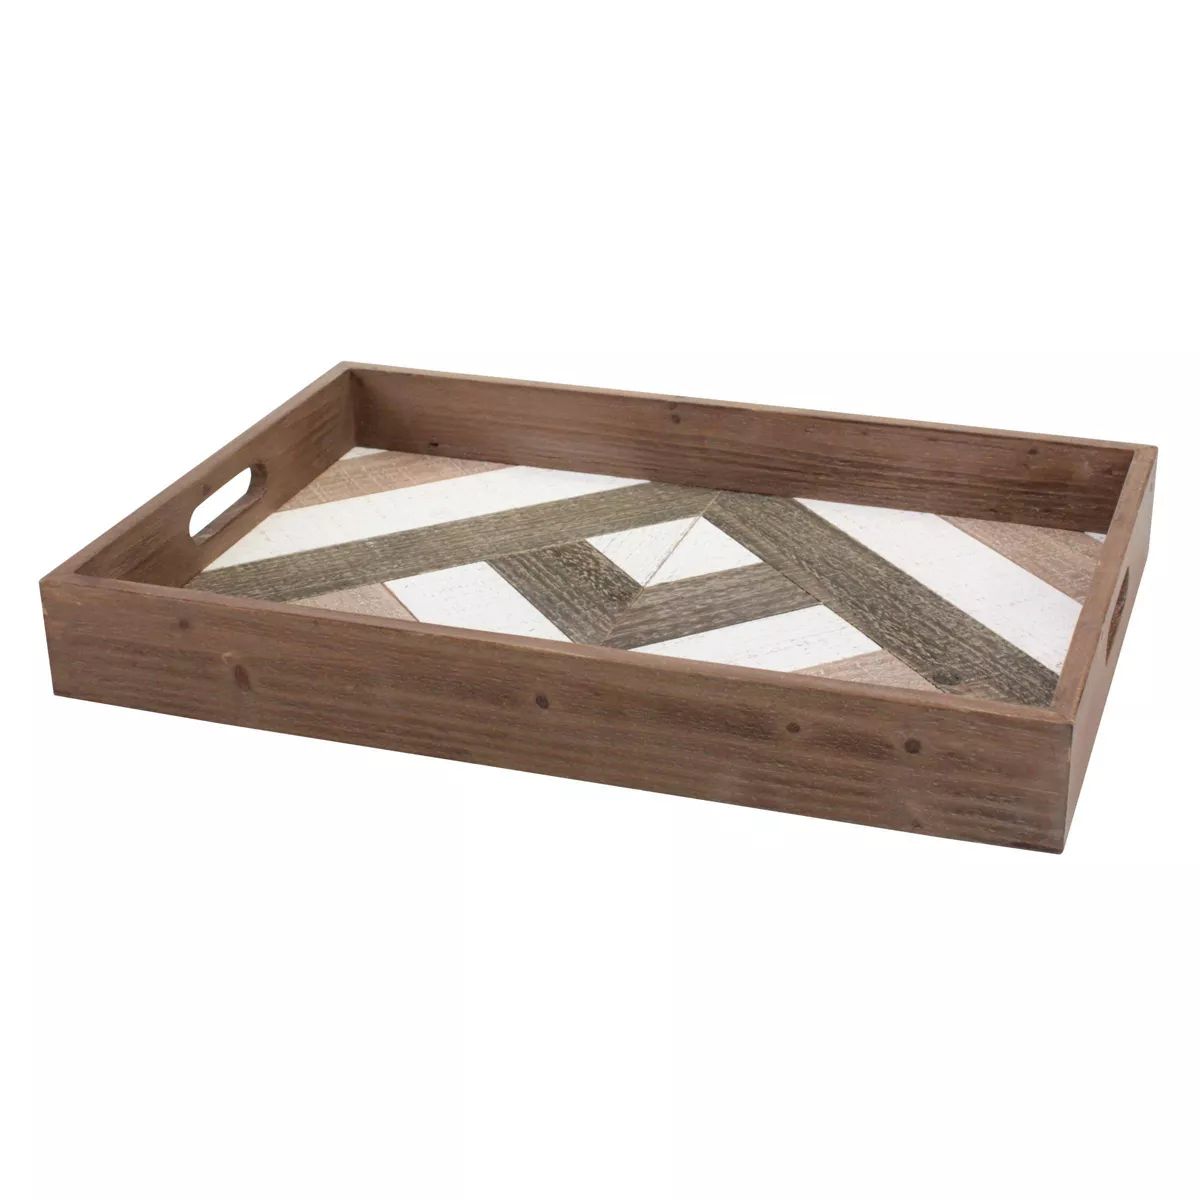 18" x 12.3" Country Rustic Geometric Wooden Serving Tray Brown - Stonebriar Collection | Target